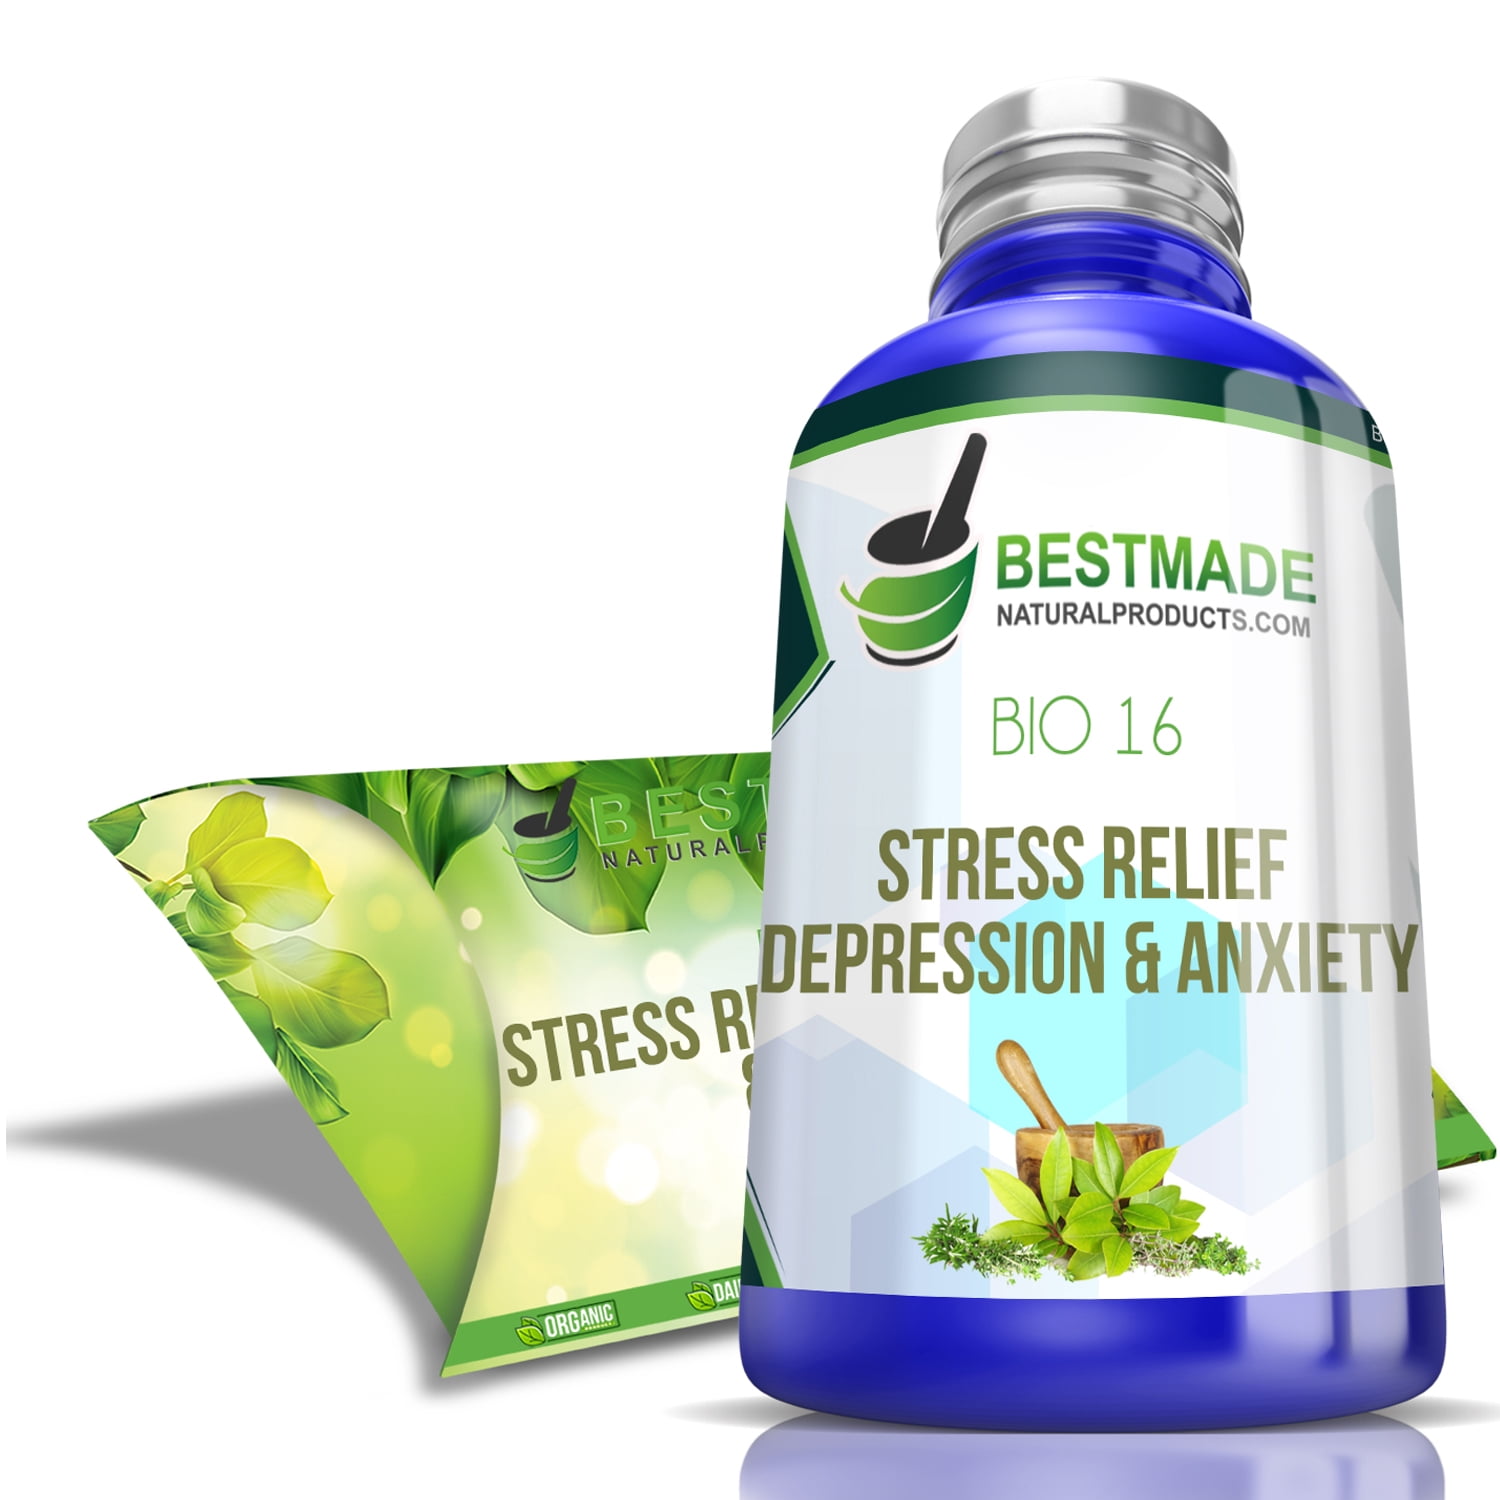 Natural Stress Relief and Anxiety Remedy: Bio16 by Bestmade Natural Products